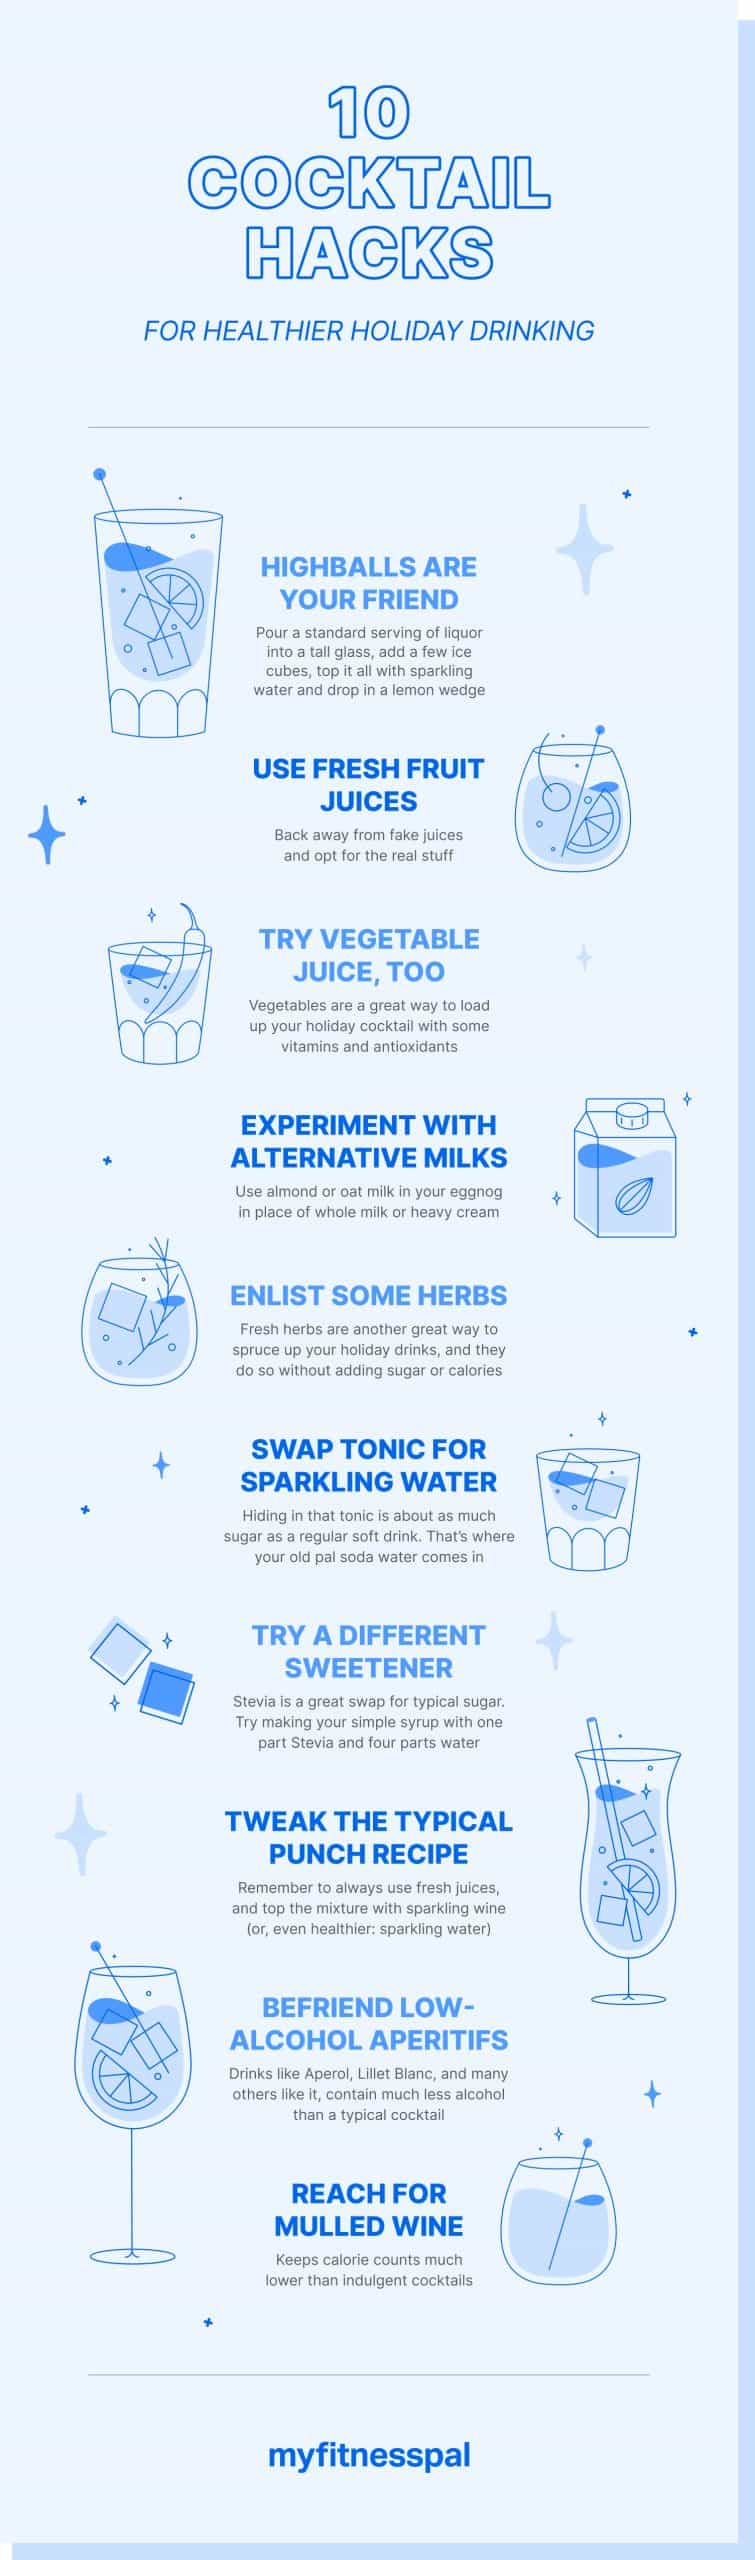 10 Ways to Make Holiday Alcoholic Drinks Healthier [INFOGRAPHIC]